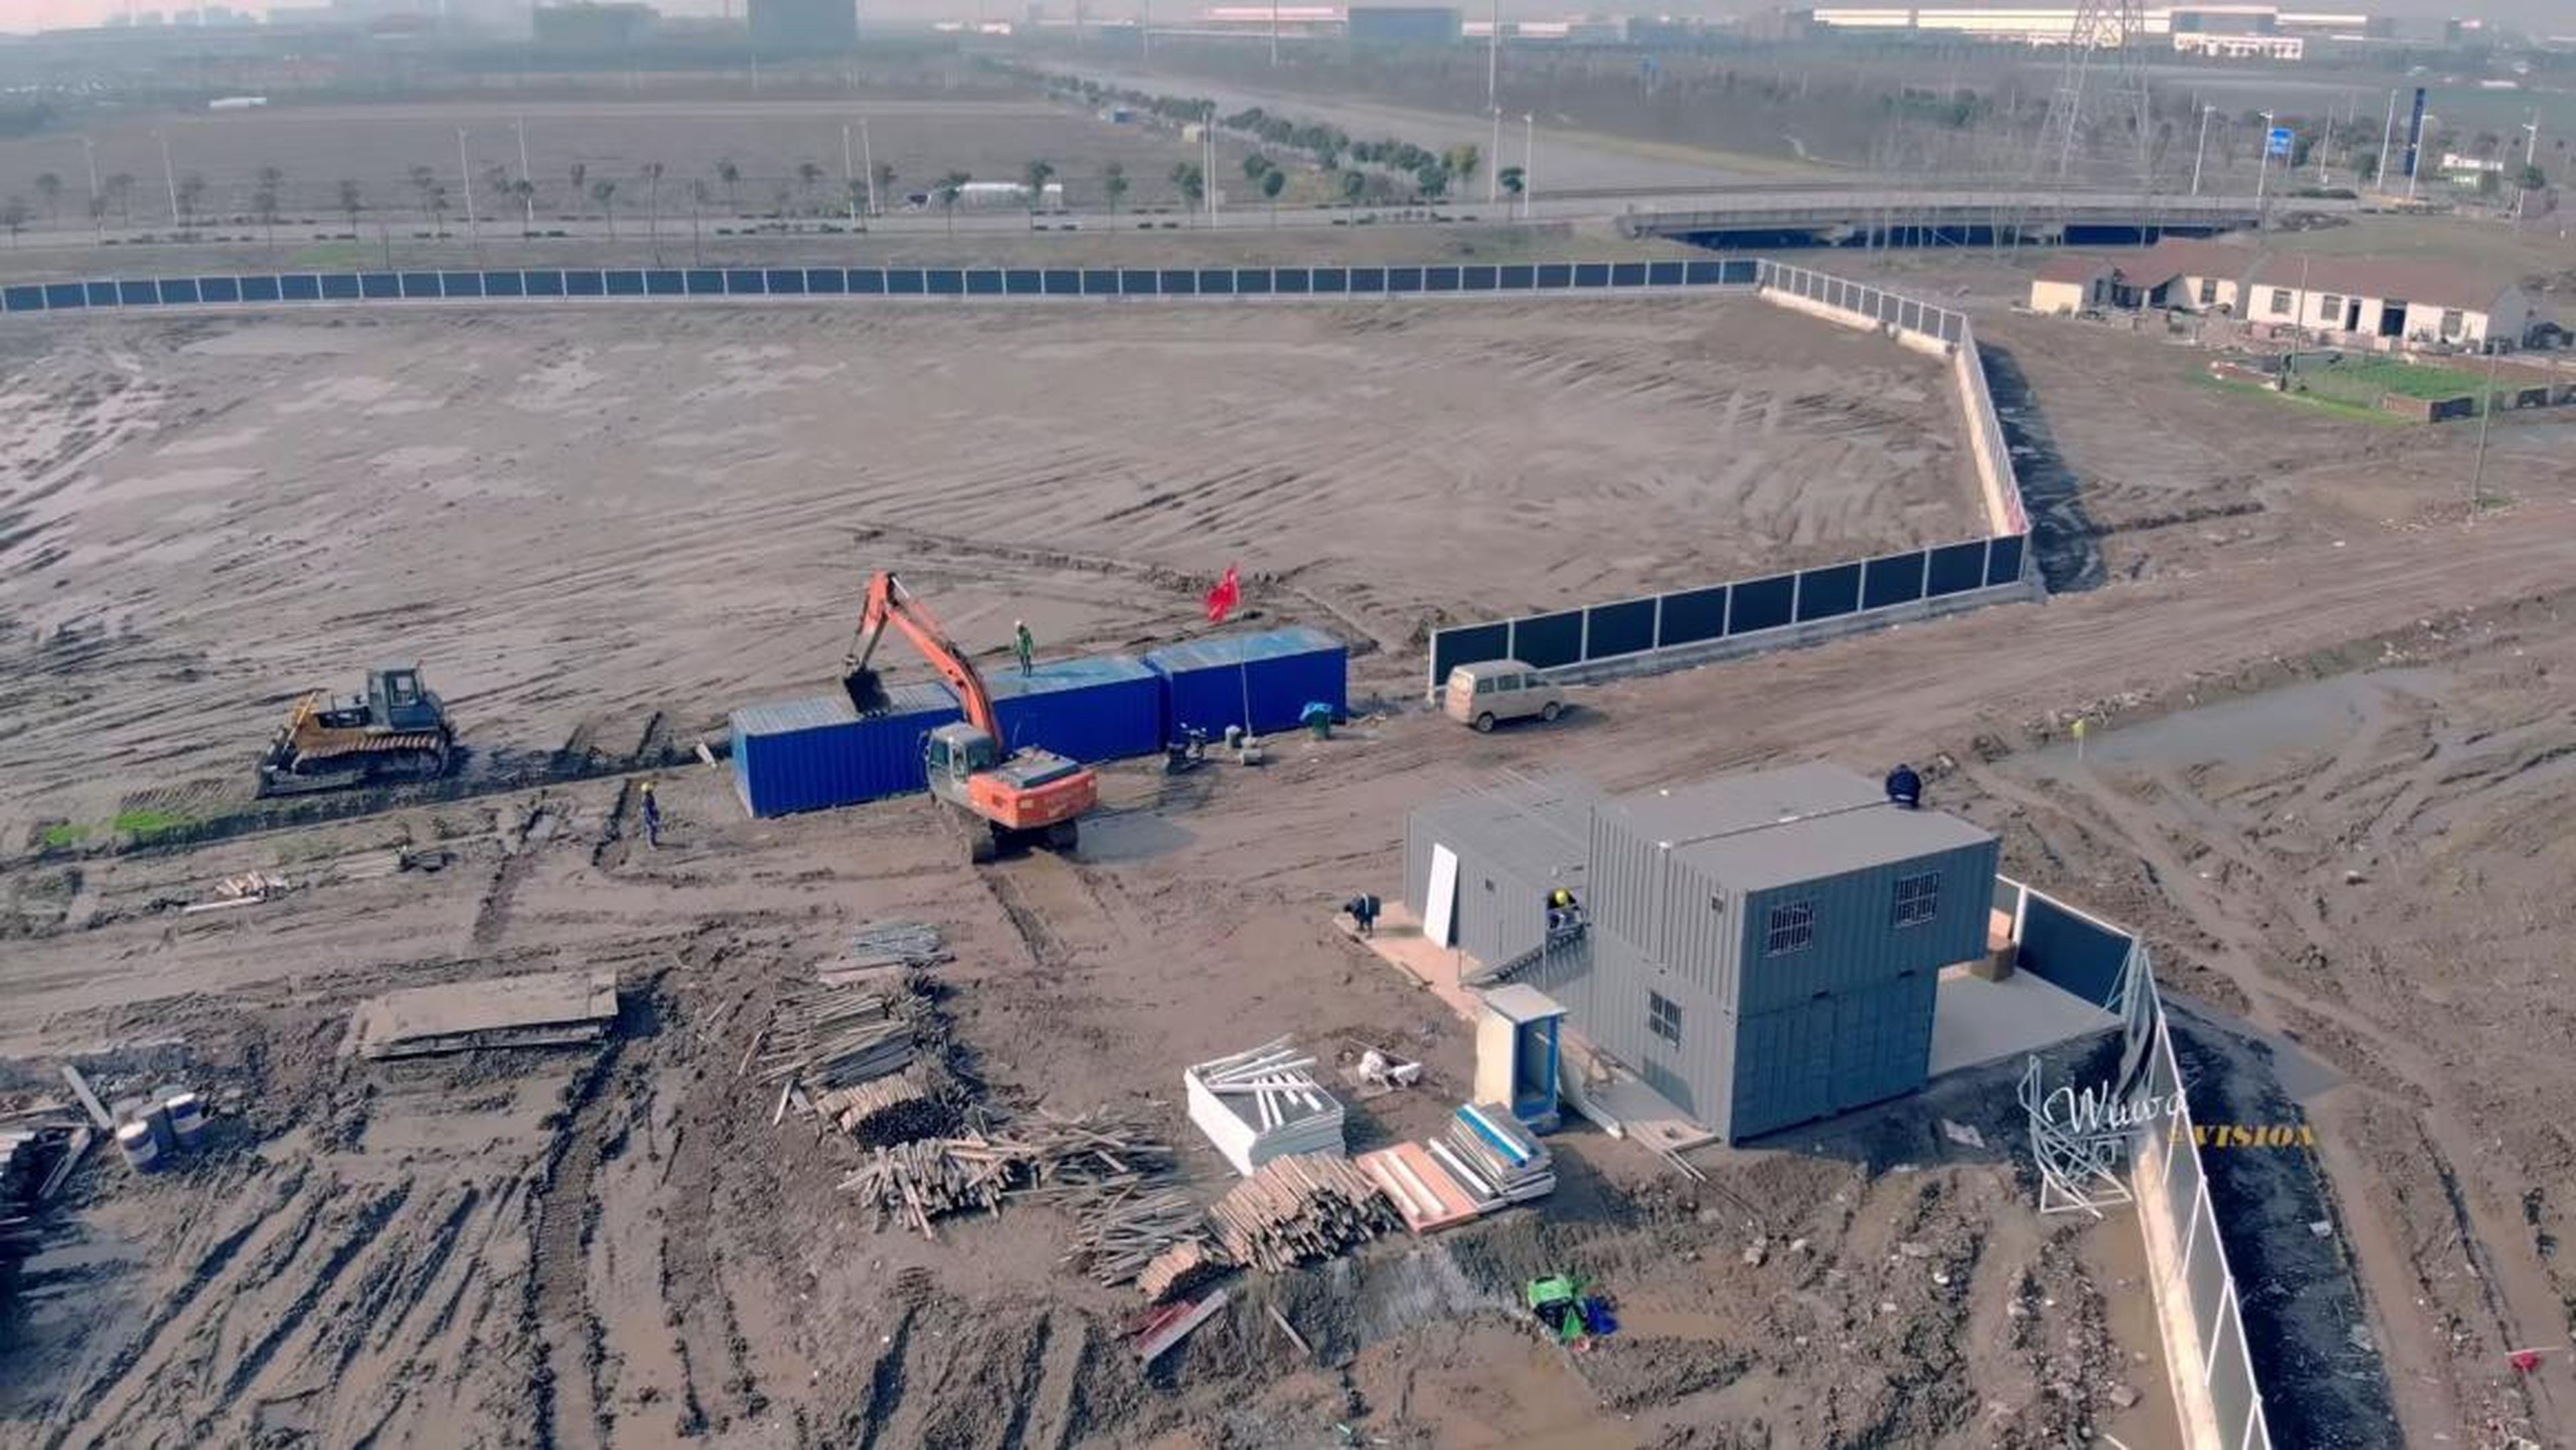 APRIL: We should have a good sense of what's going on with Tesla new factory in Shanghai, China.